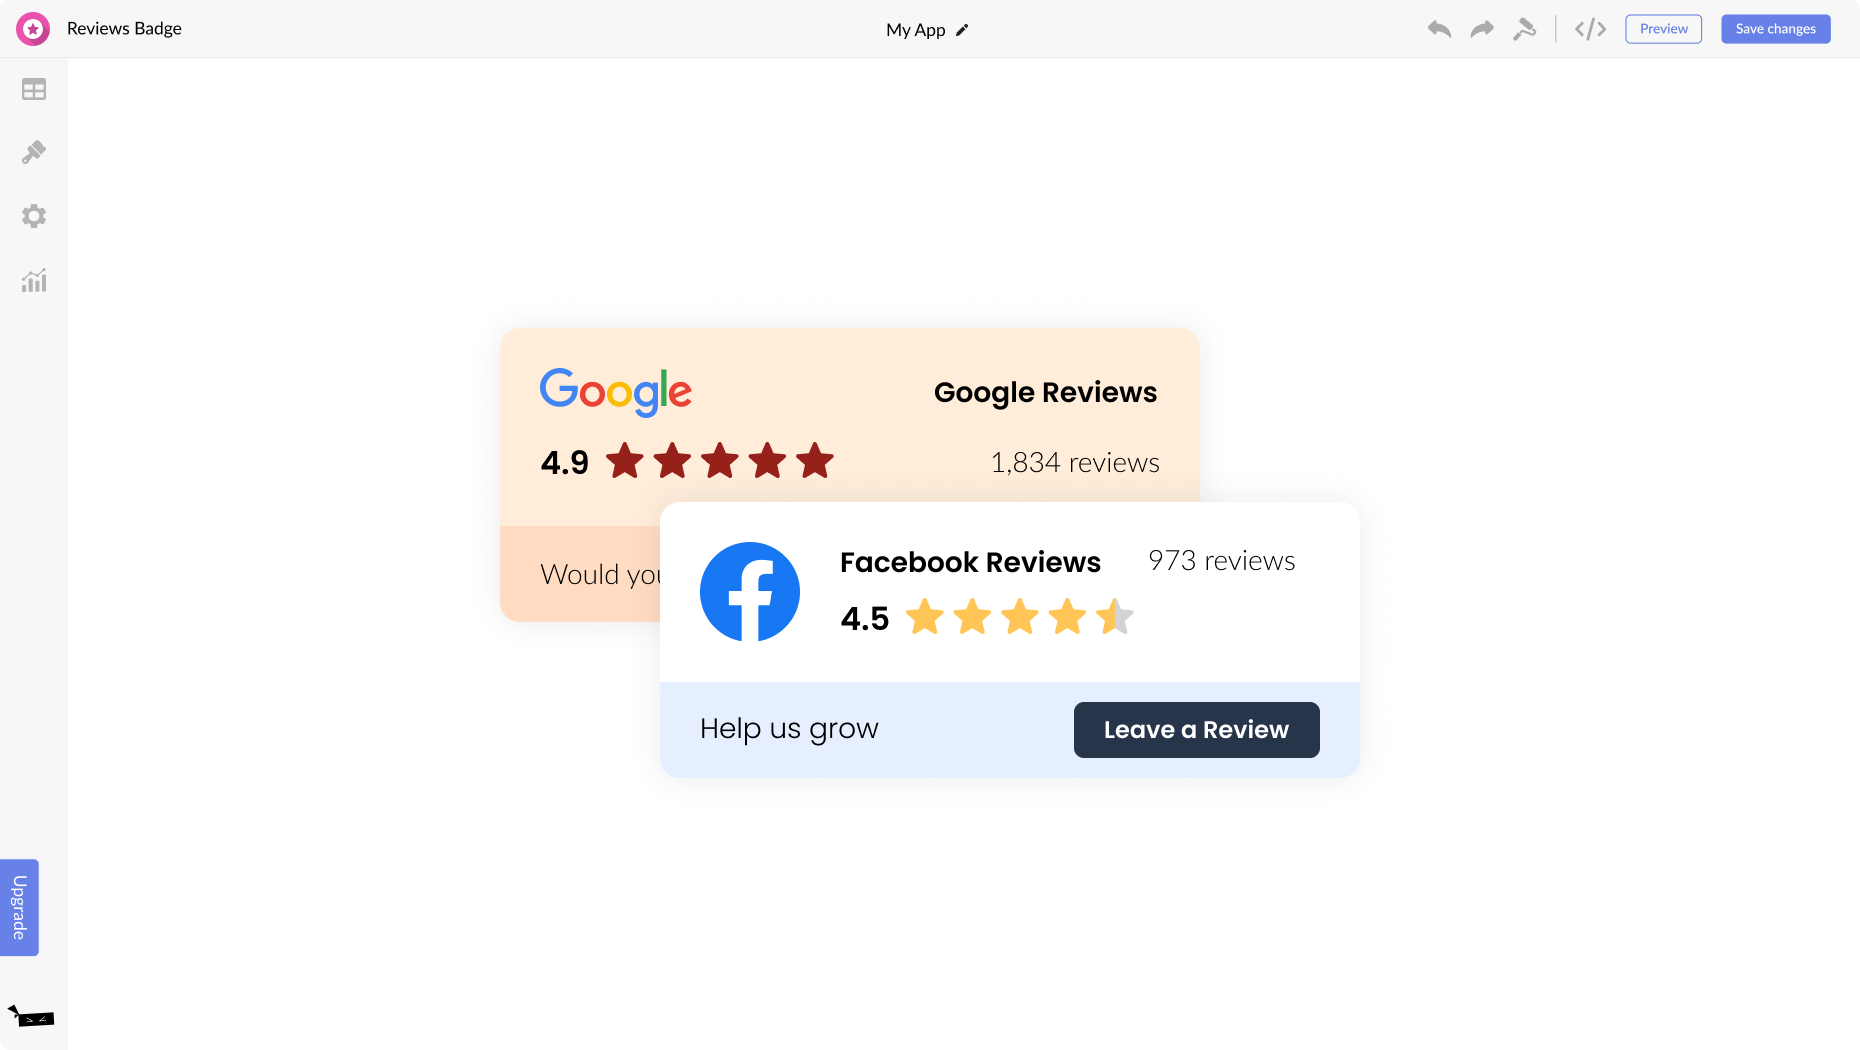 Reviews Badge for Showit